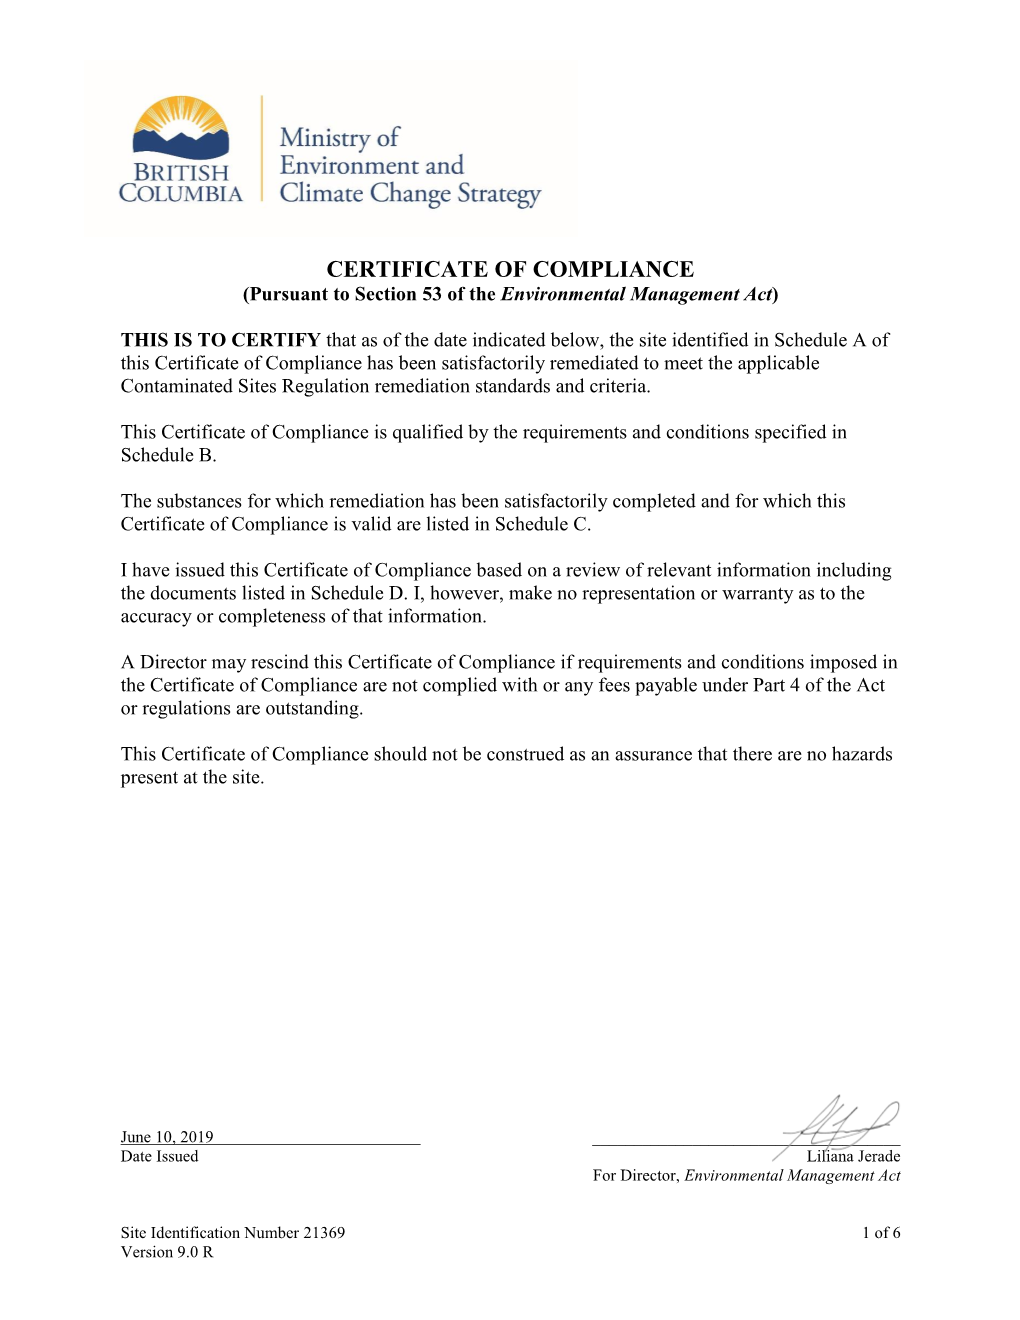 CERTIFICATE of COMPLIANCE (Pursuant to Section 53 of the Environmental Management Act)